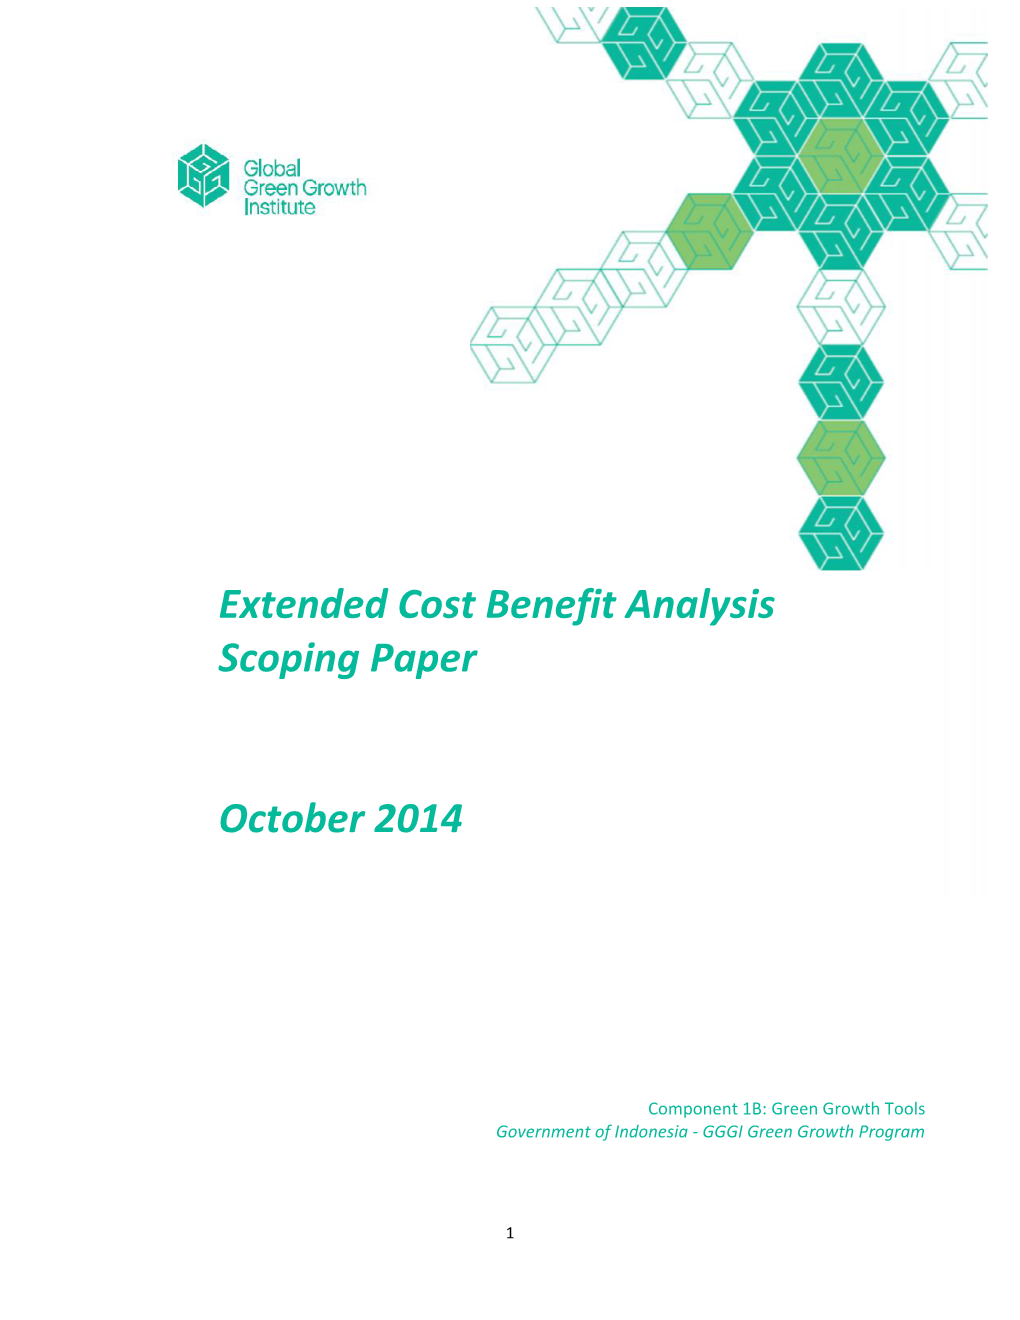 Extended Cost Benefit Analysis Scoping Paper October 2014